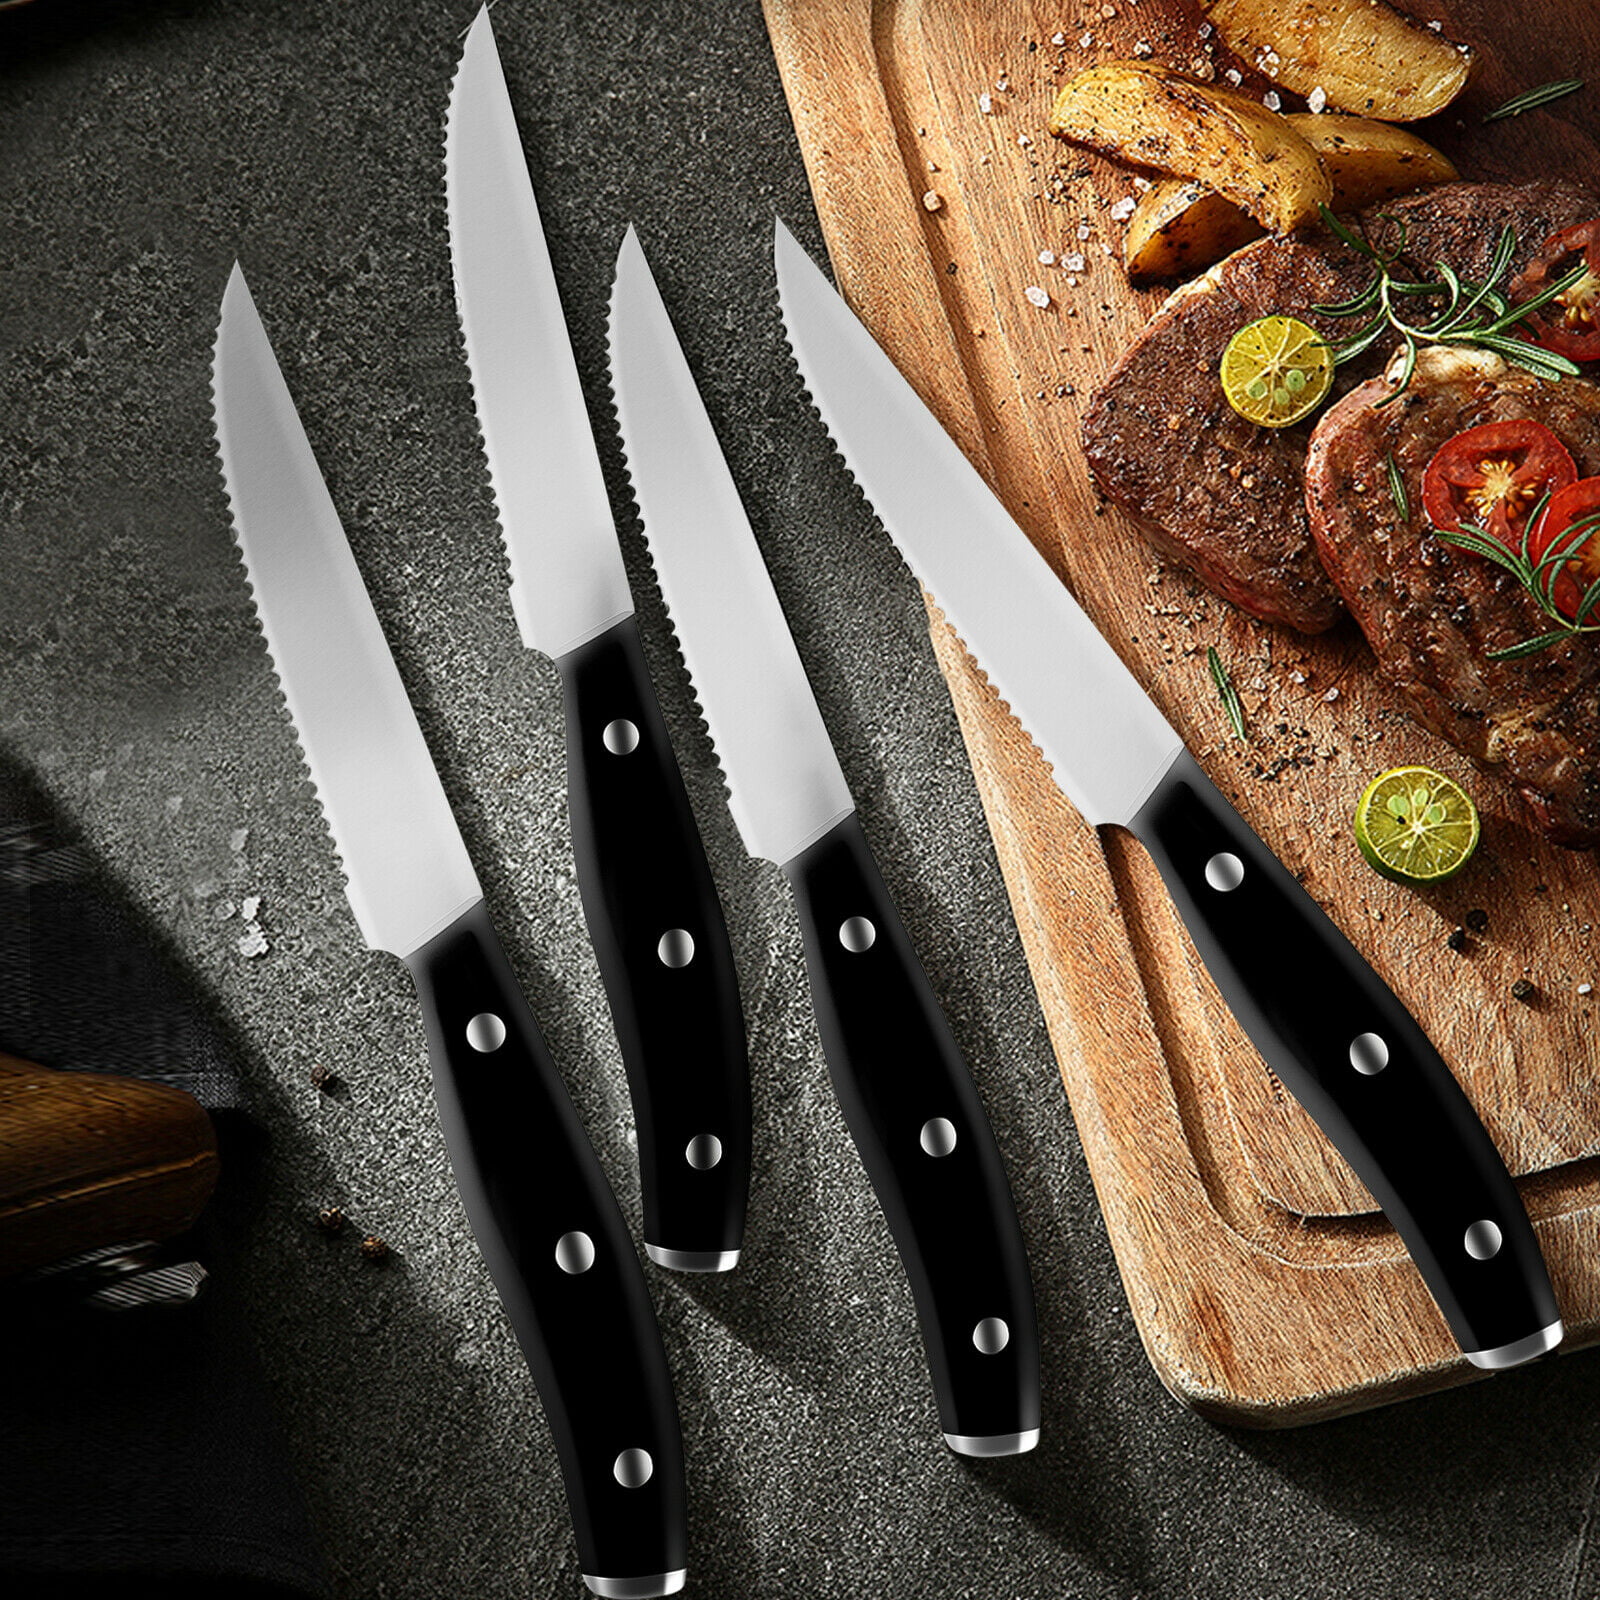 Kitchen + Home Steak Knives – Stainless Steel Pointed Tip Serrated Steak Knife Set – 6 Pack